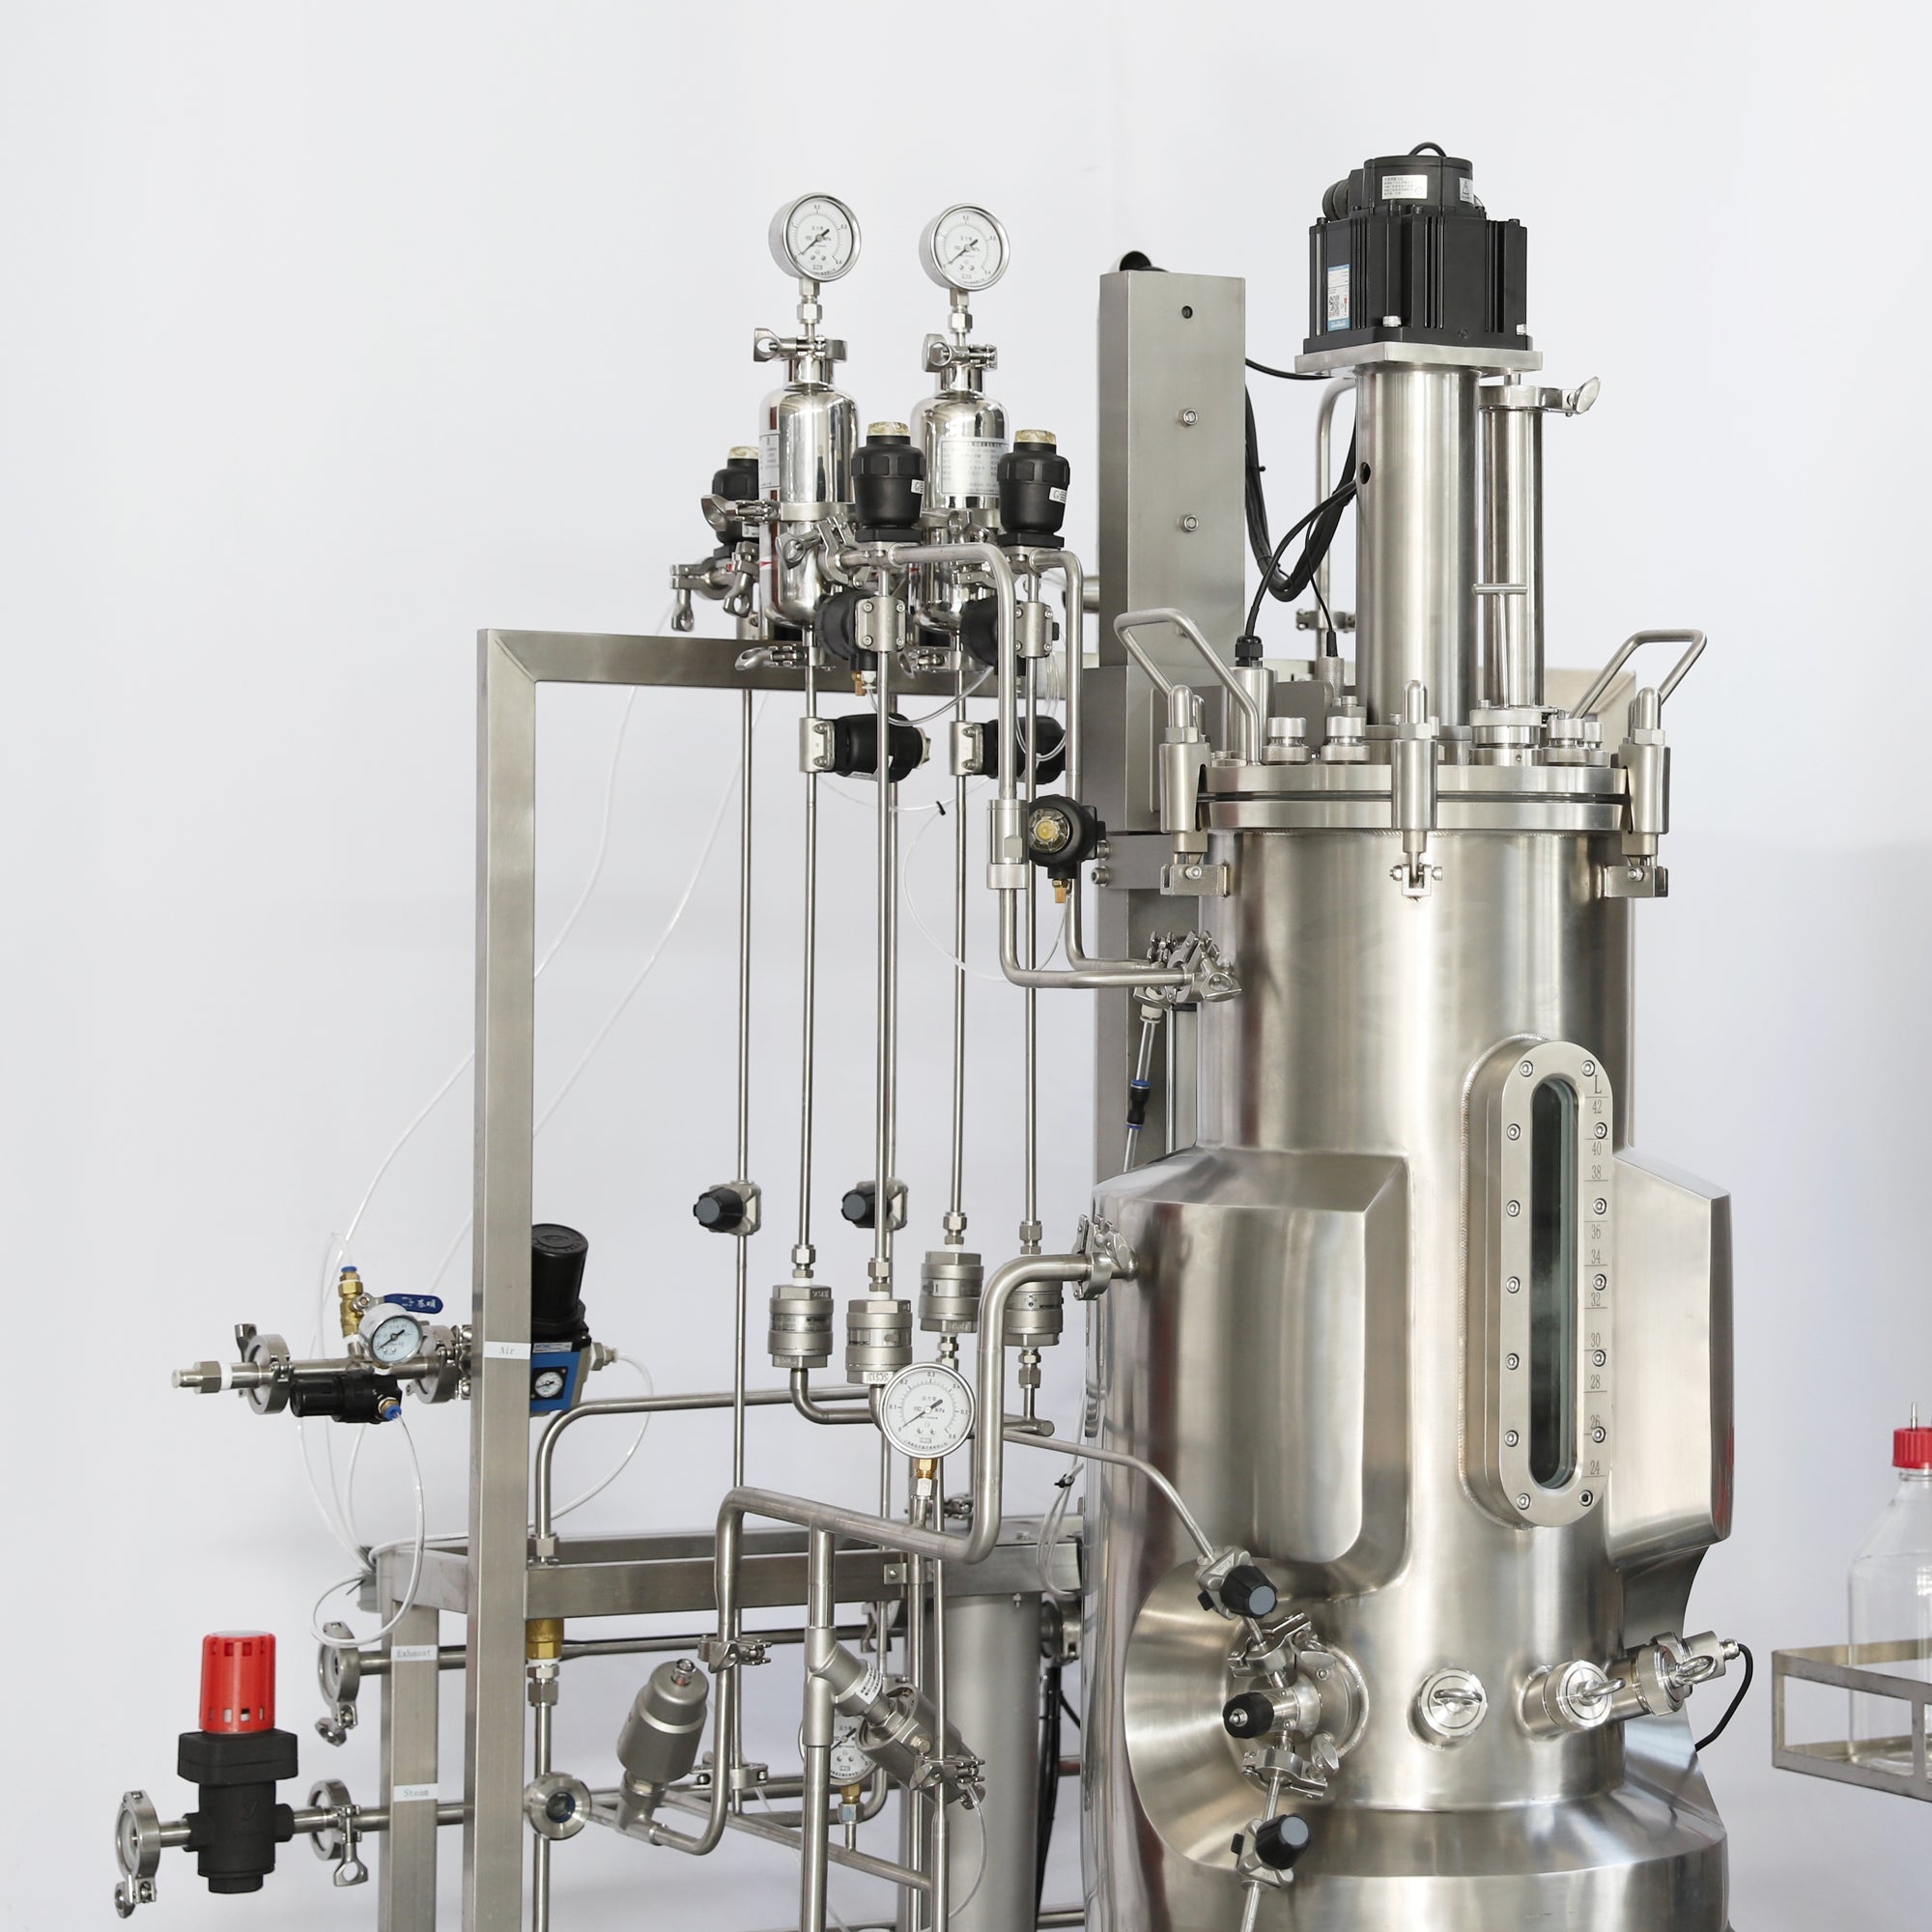 50L Stainless Steel Bioreactor for Microbial and Cell Culture BR500-C1